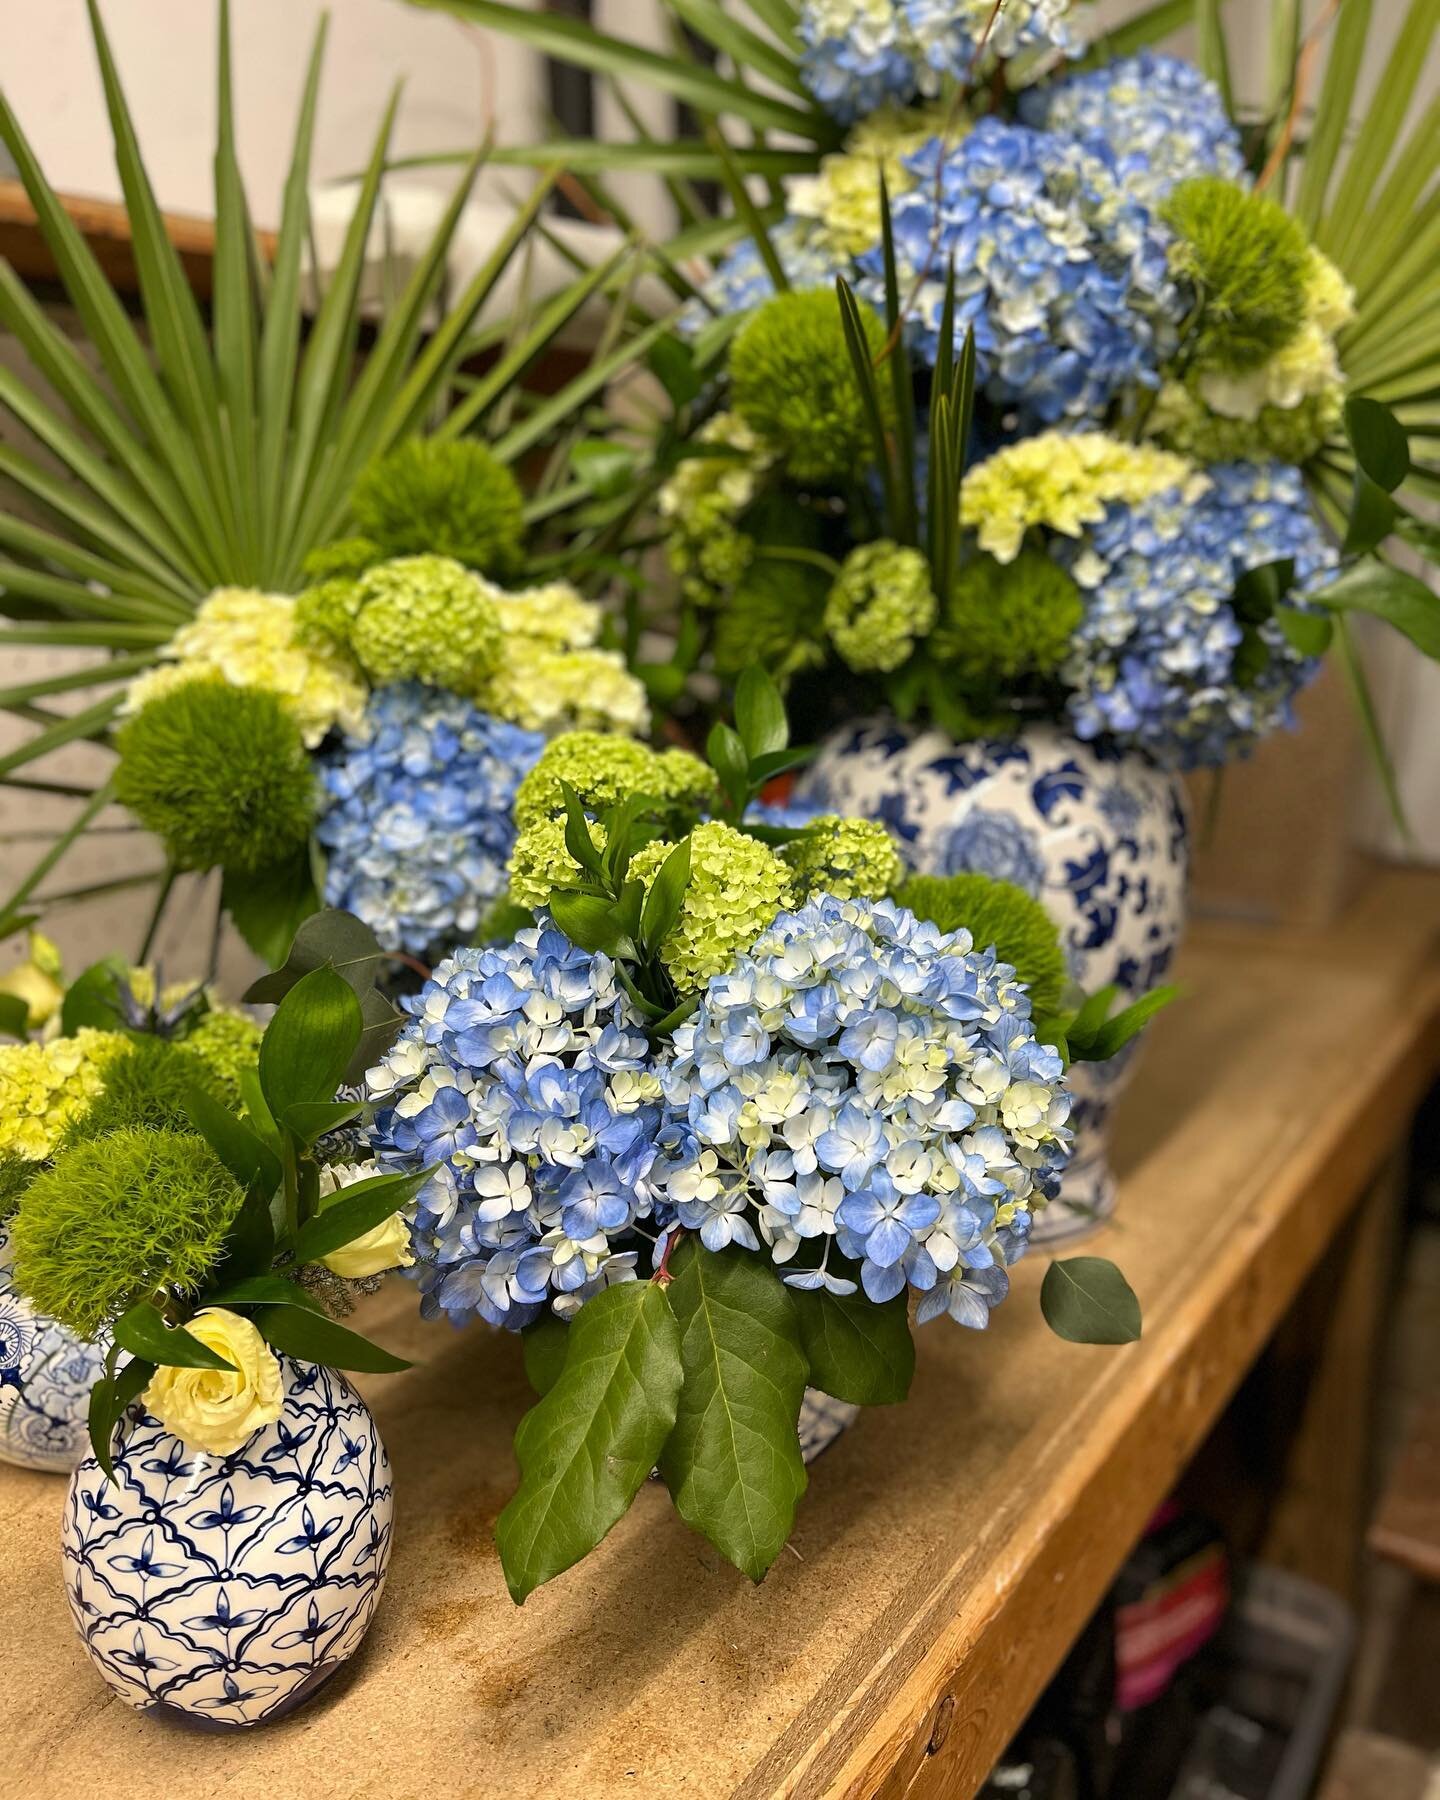 When you see these, you see the finished product, and it is easy to overlook all of the people who contributed to make these arrangements possible.  So on this Labor Day, we owe our heartfelt thanks to everyone at Annapolis Events who make our busine